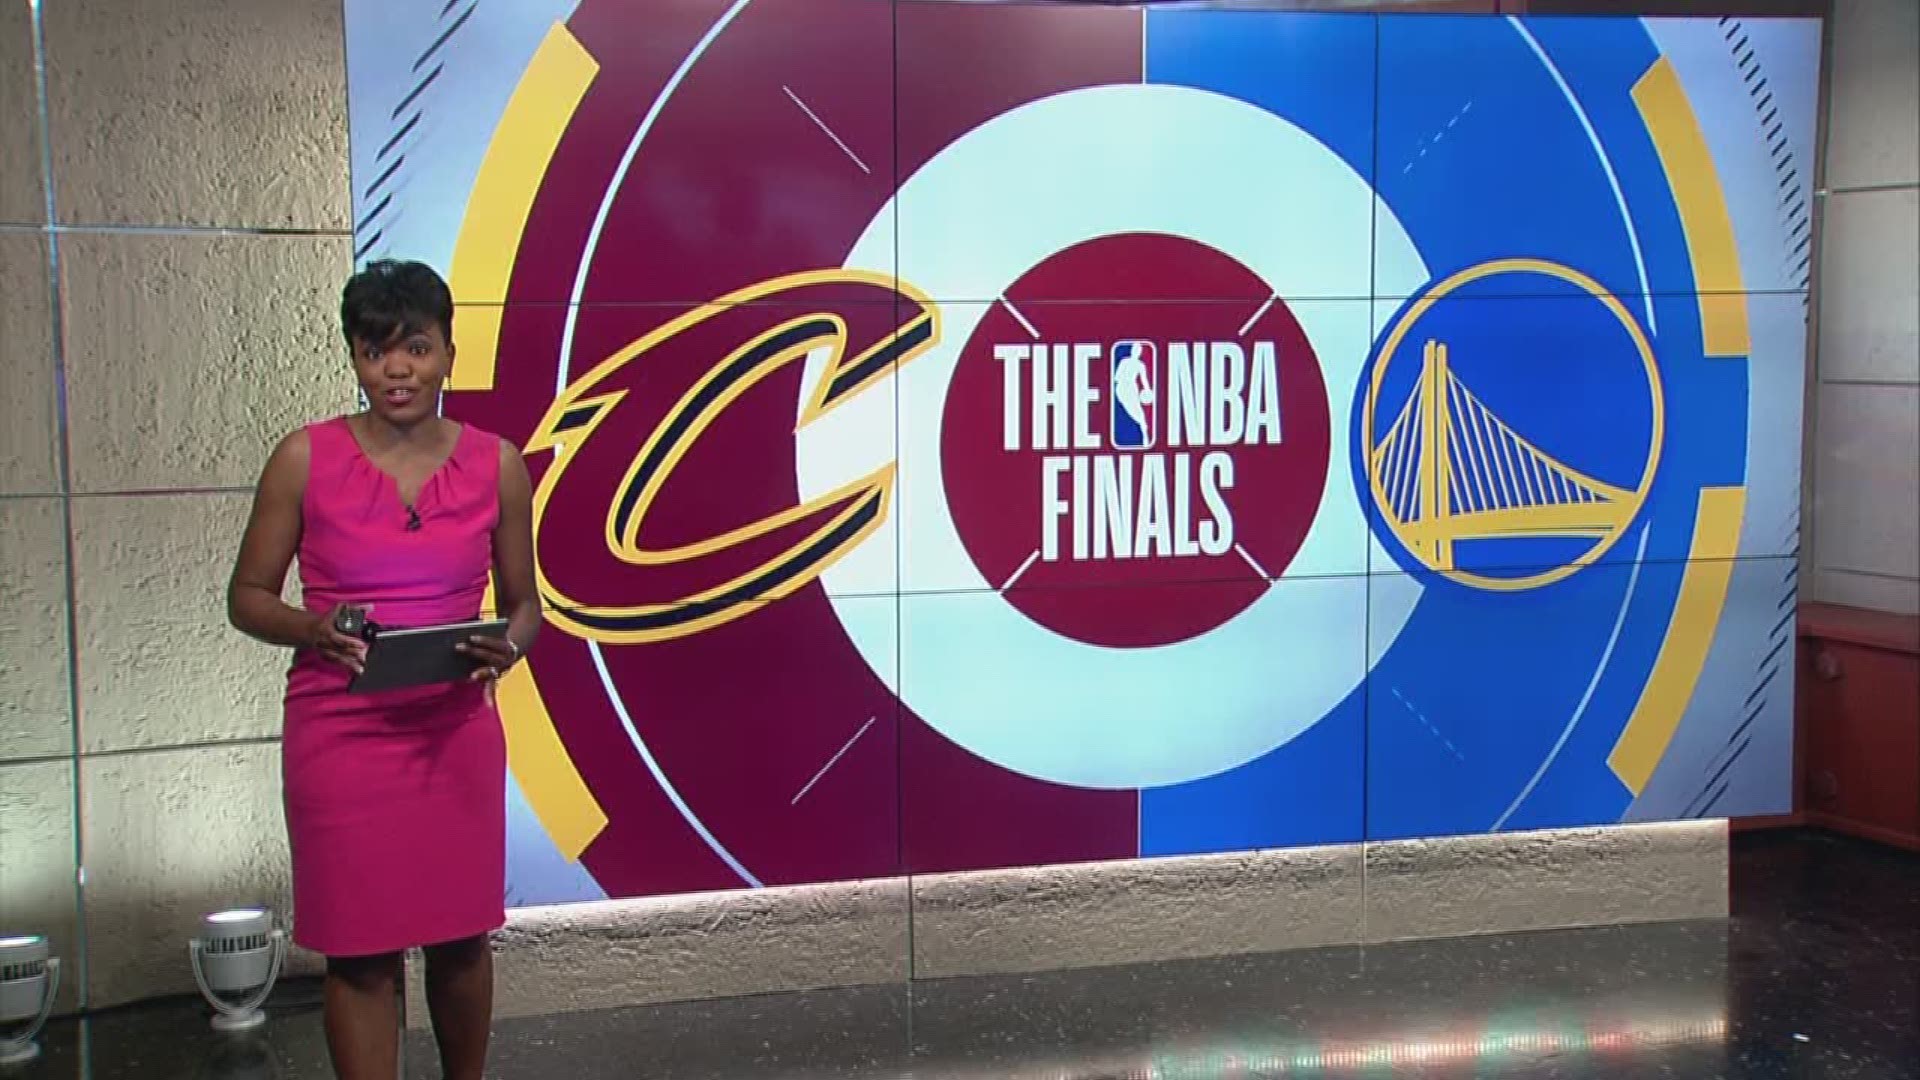 May 31, 2018: Crews spent the day prepping Quicken Loans Arena for the NBA Finals as the Cleveland Cavaliers battle the Golden State Warriors.